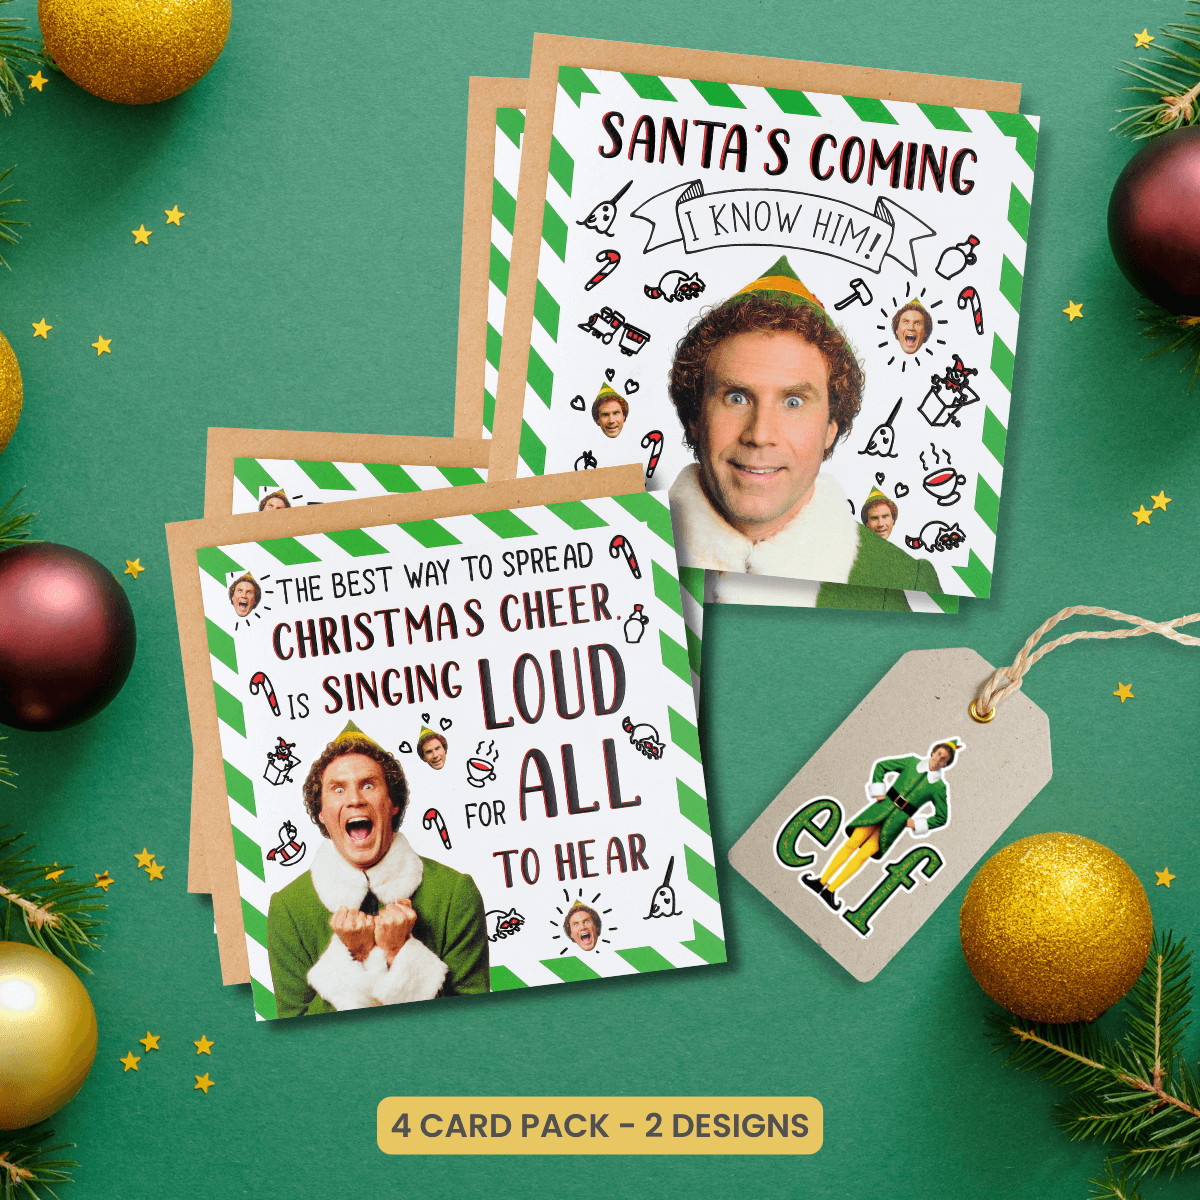 Elf Christmas Cards Pack of 4 - Buddy The Elf Cards For Christmas Bundle